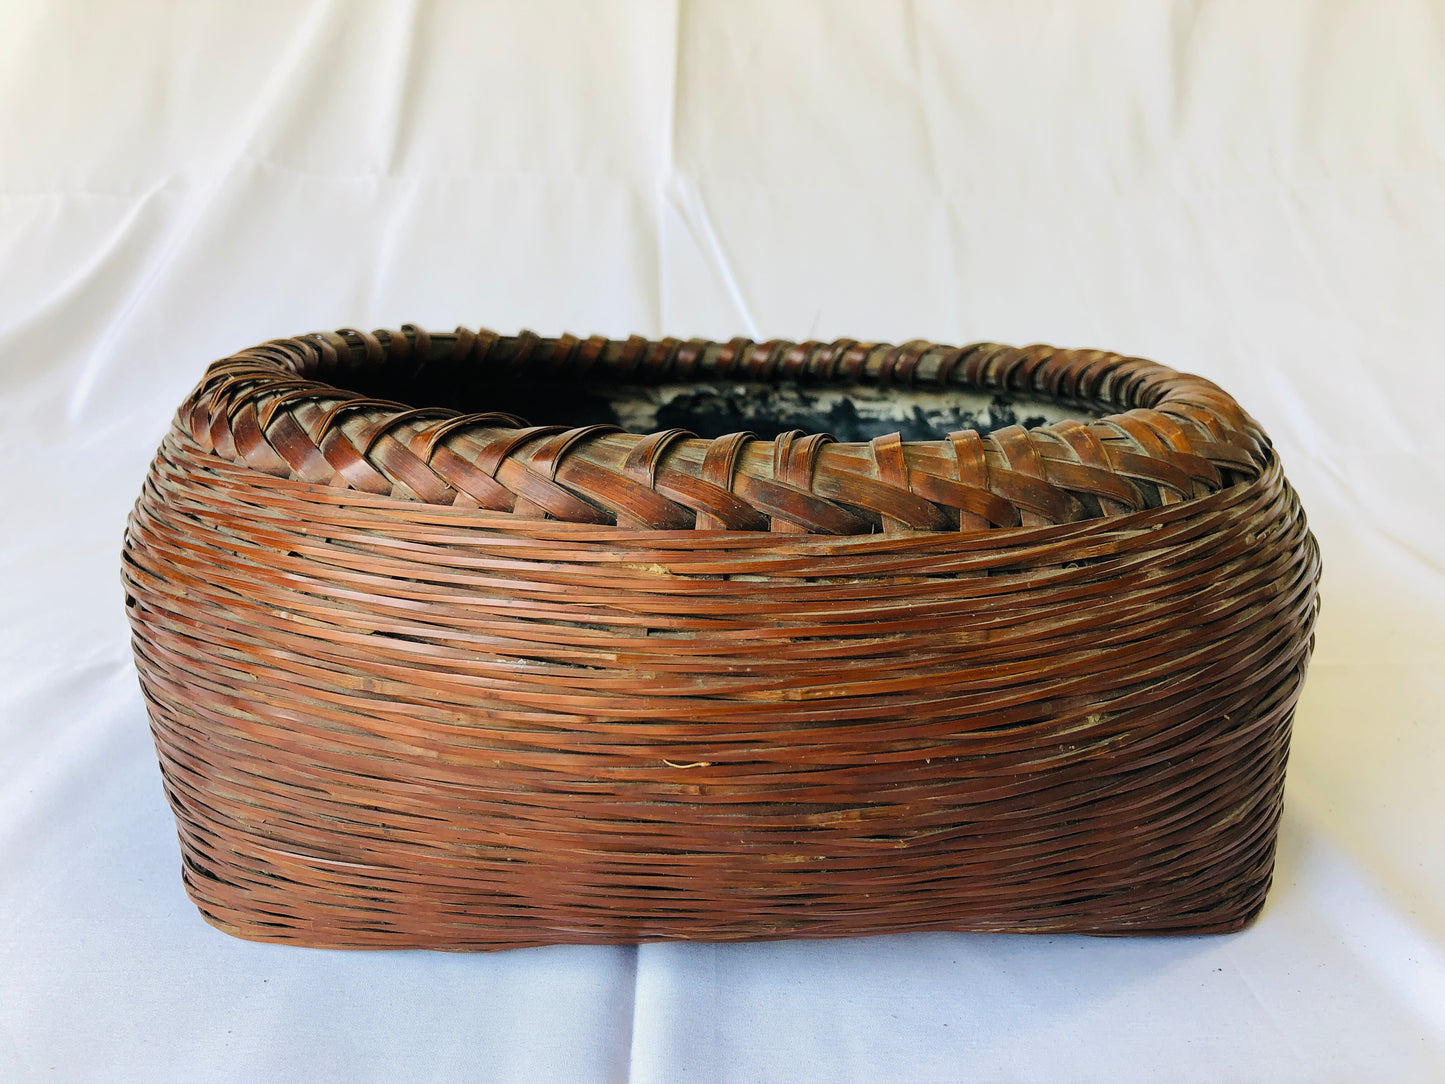 Y4381 Bamboo Woven Basket Charcoal container Japan antique tea ceremony utensils